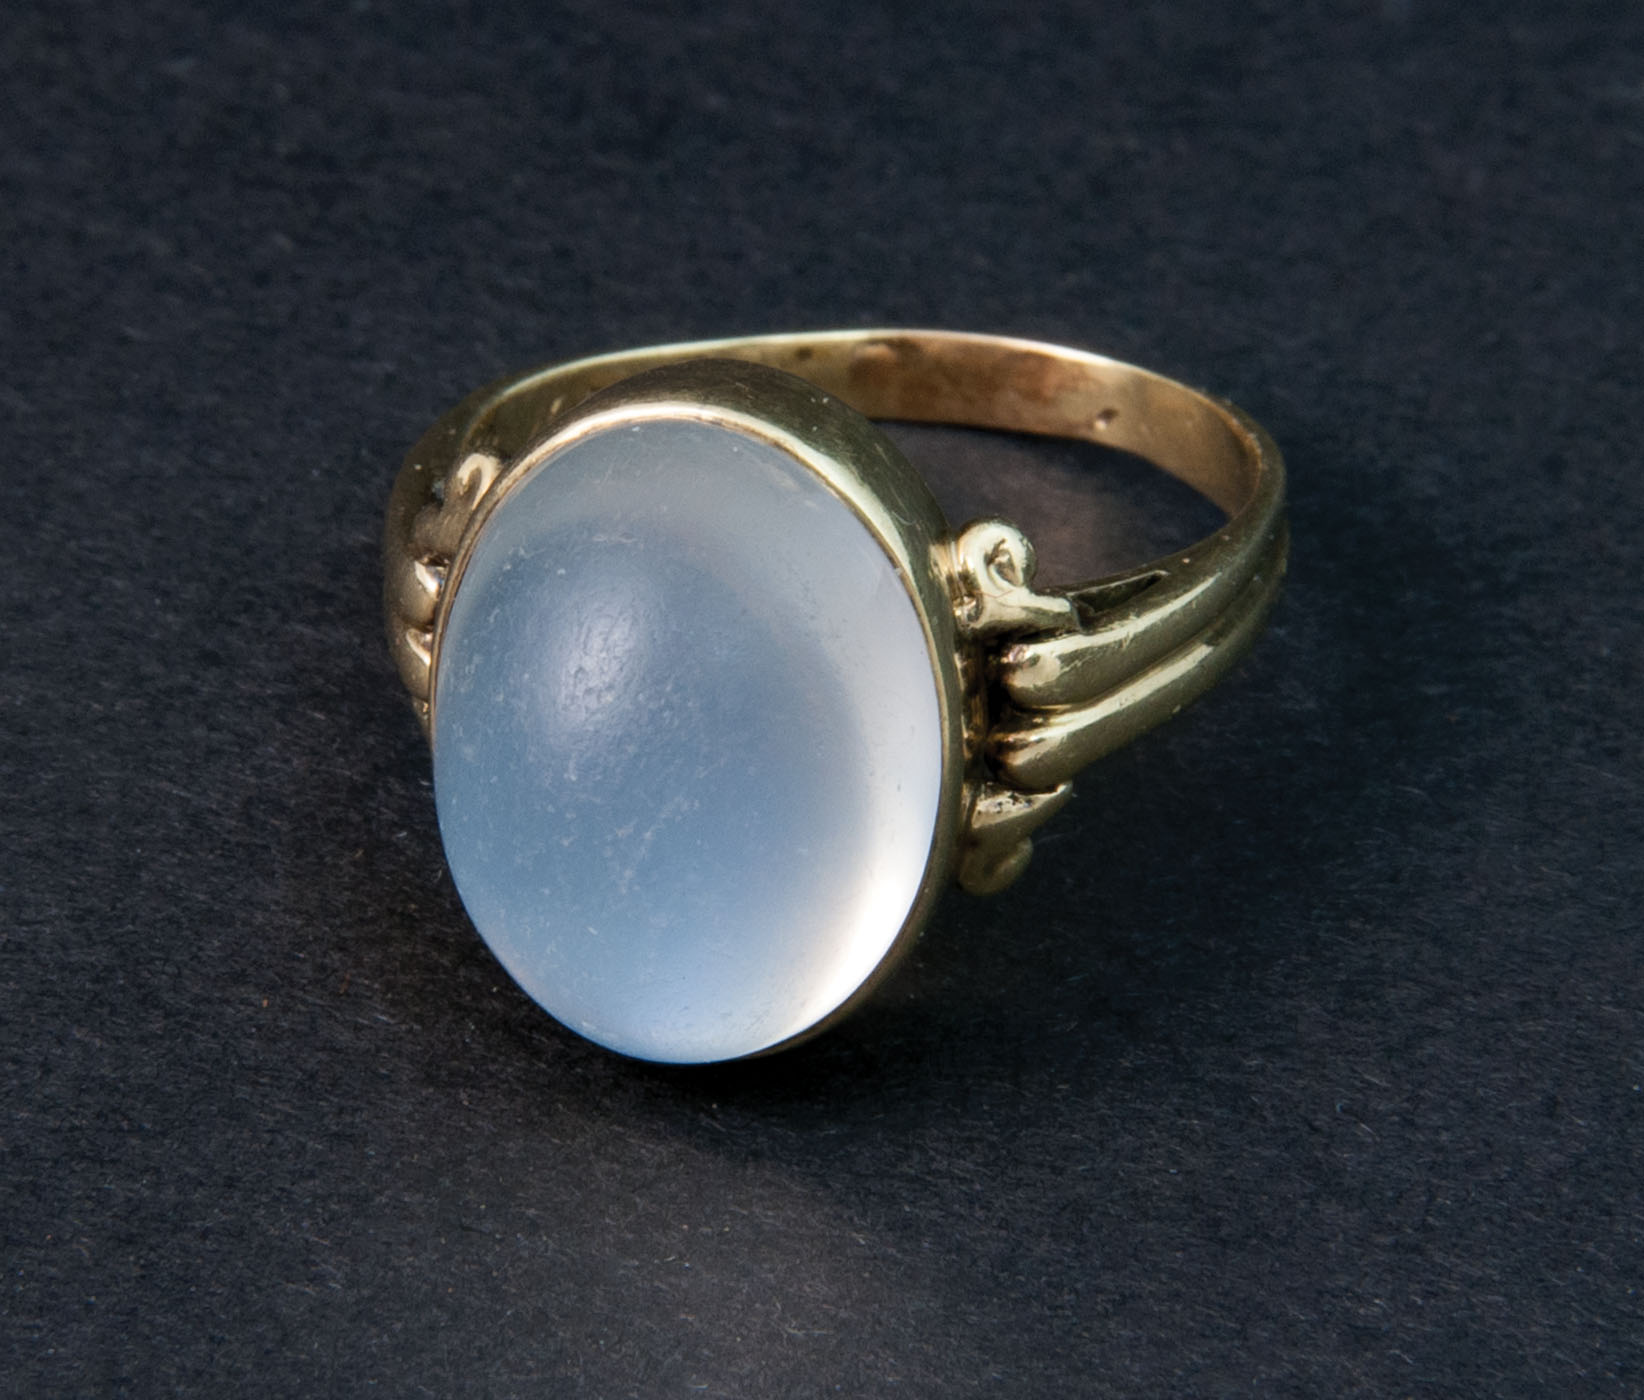 Lot 22: Moonstone and Gold Jewelry – Willis Henry Auctions, Inc.